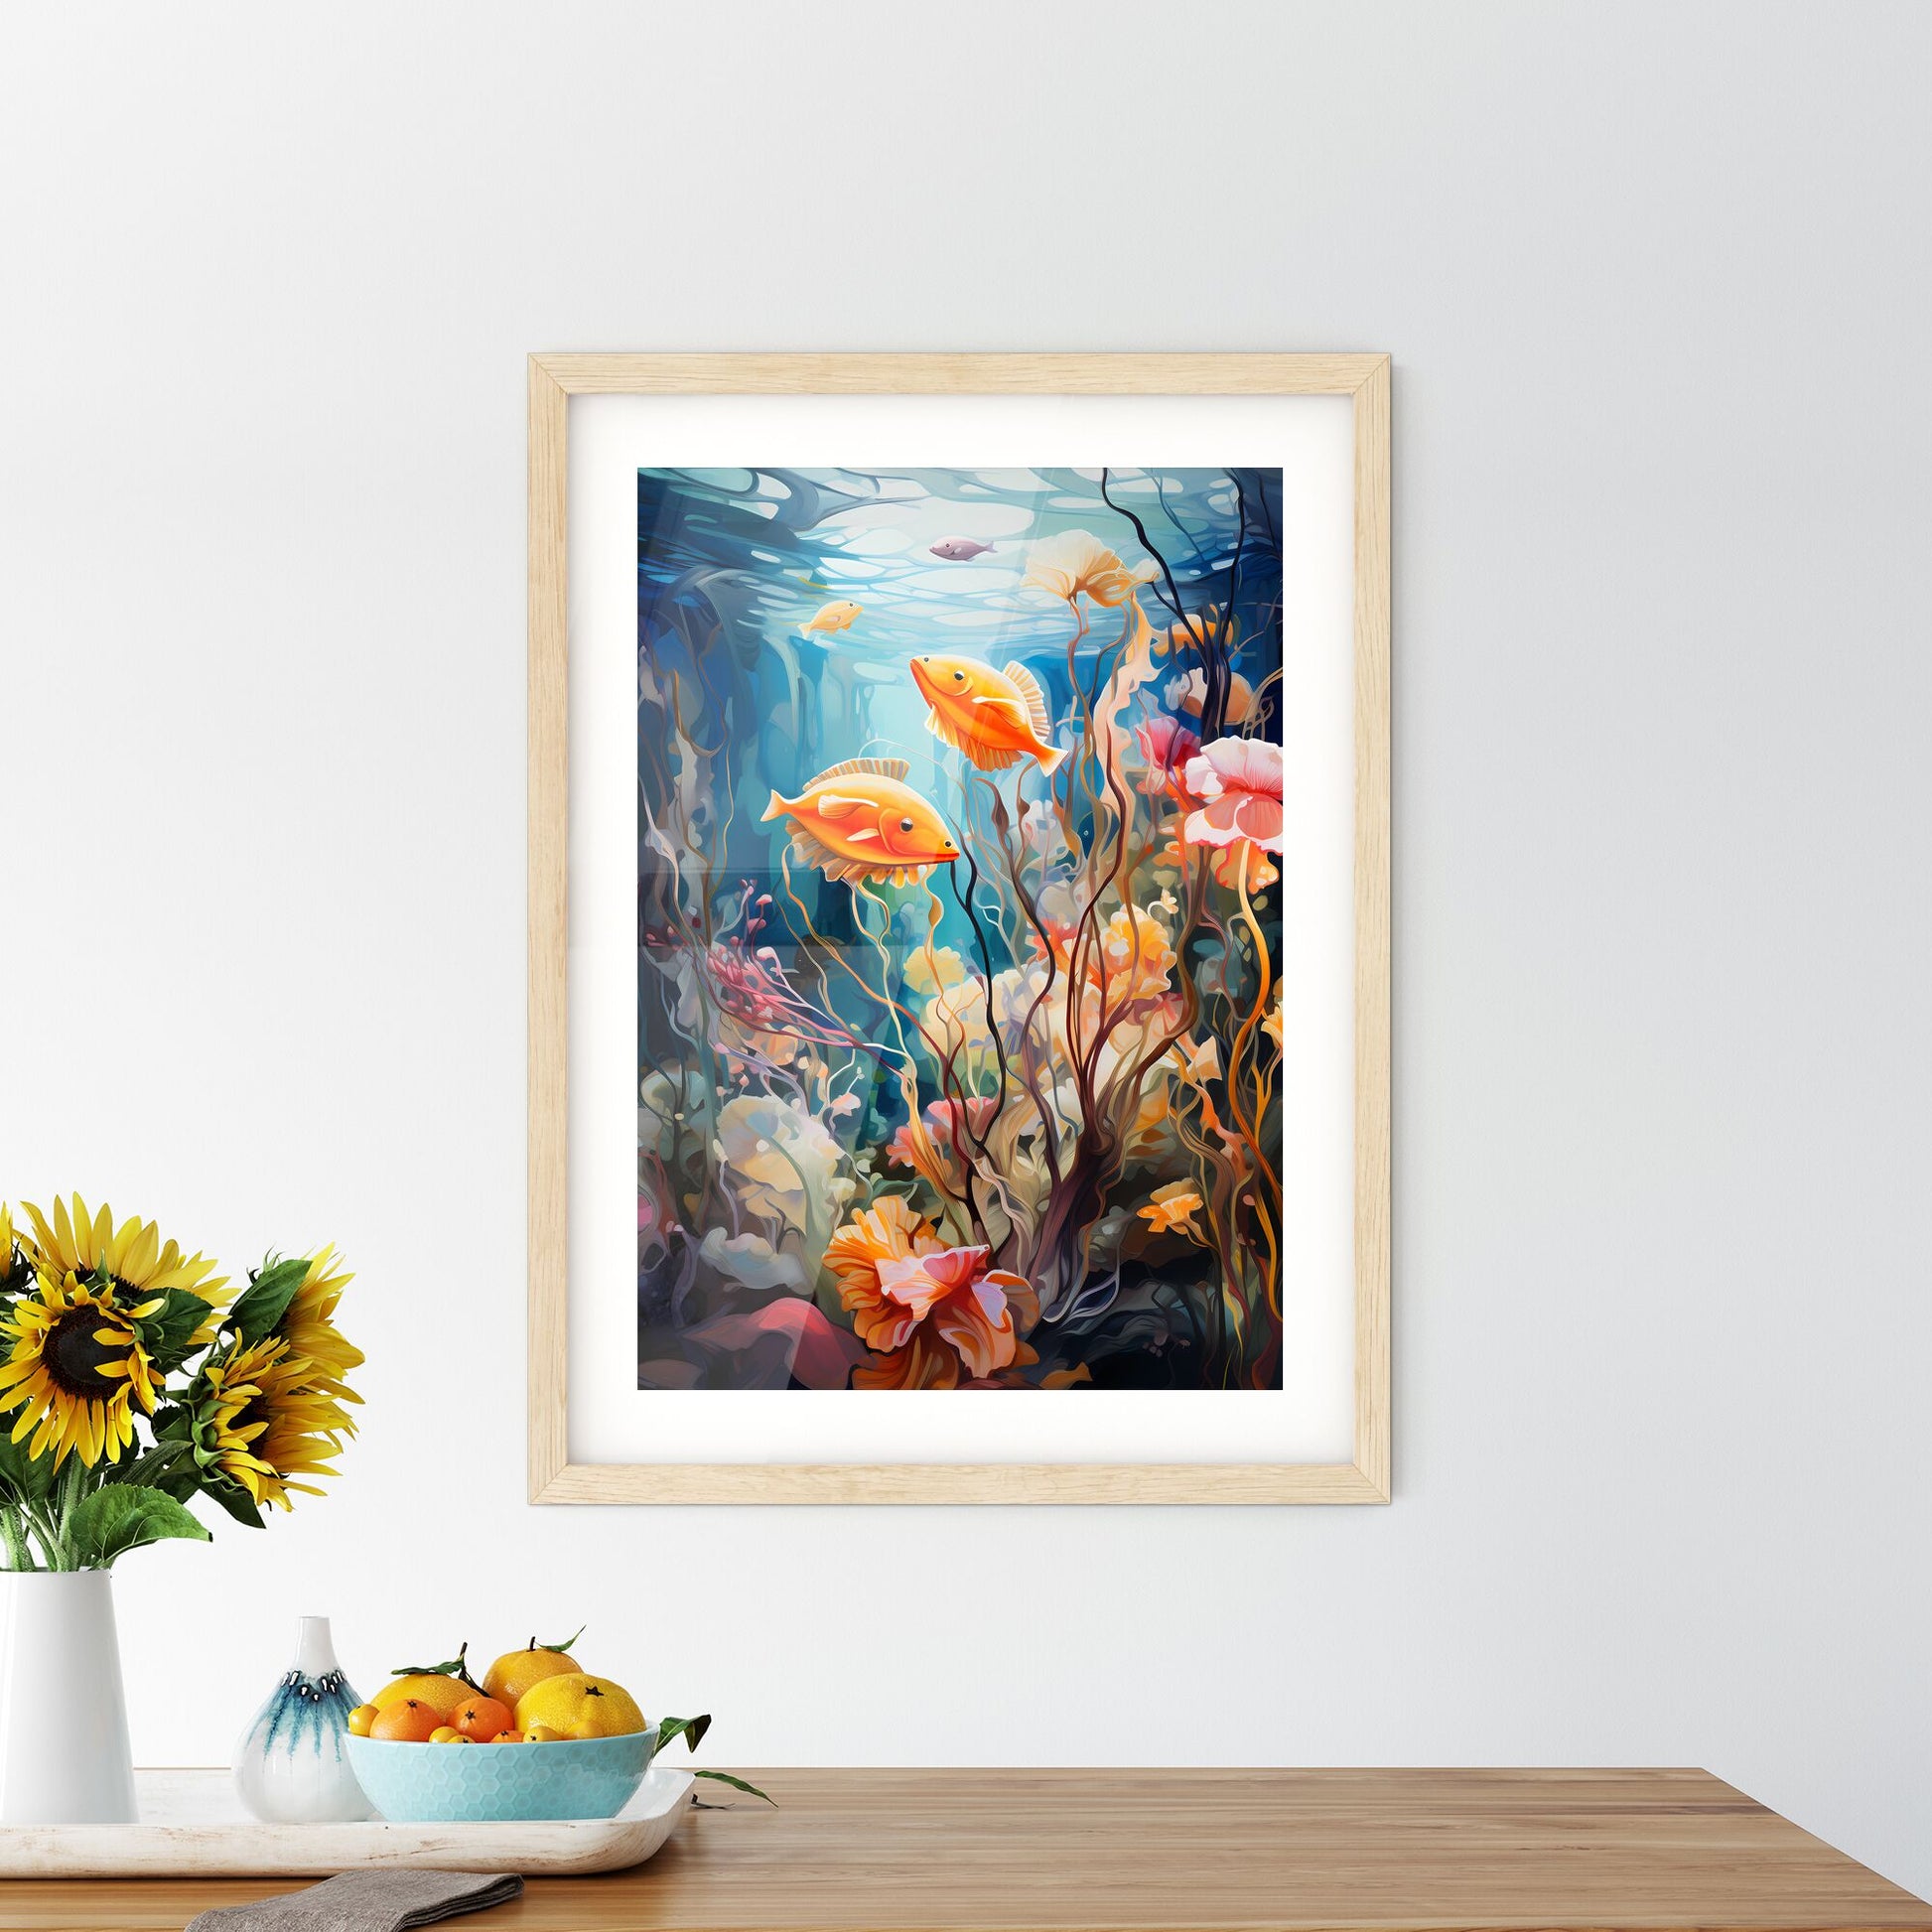 Underwater Aquatic Life With Fishes - A Painting Of Fish Swimming In Water Default Title